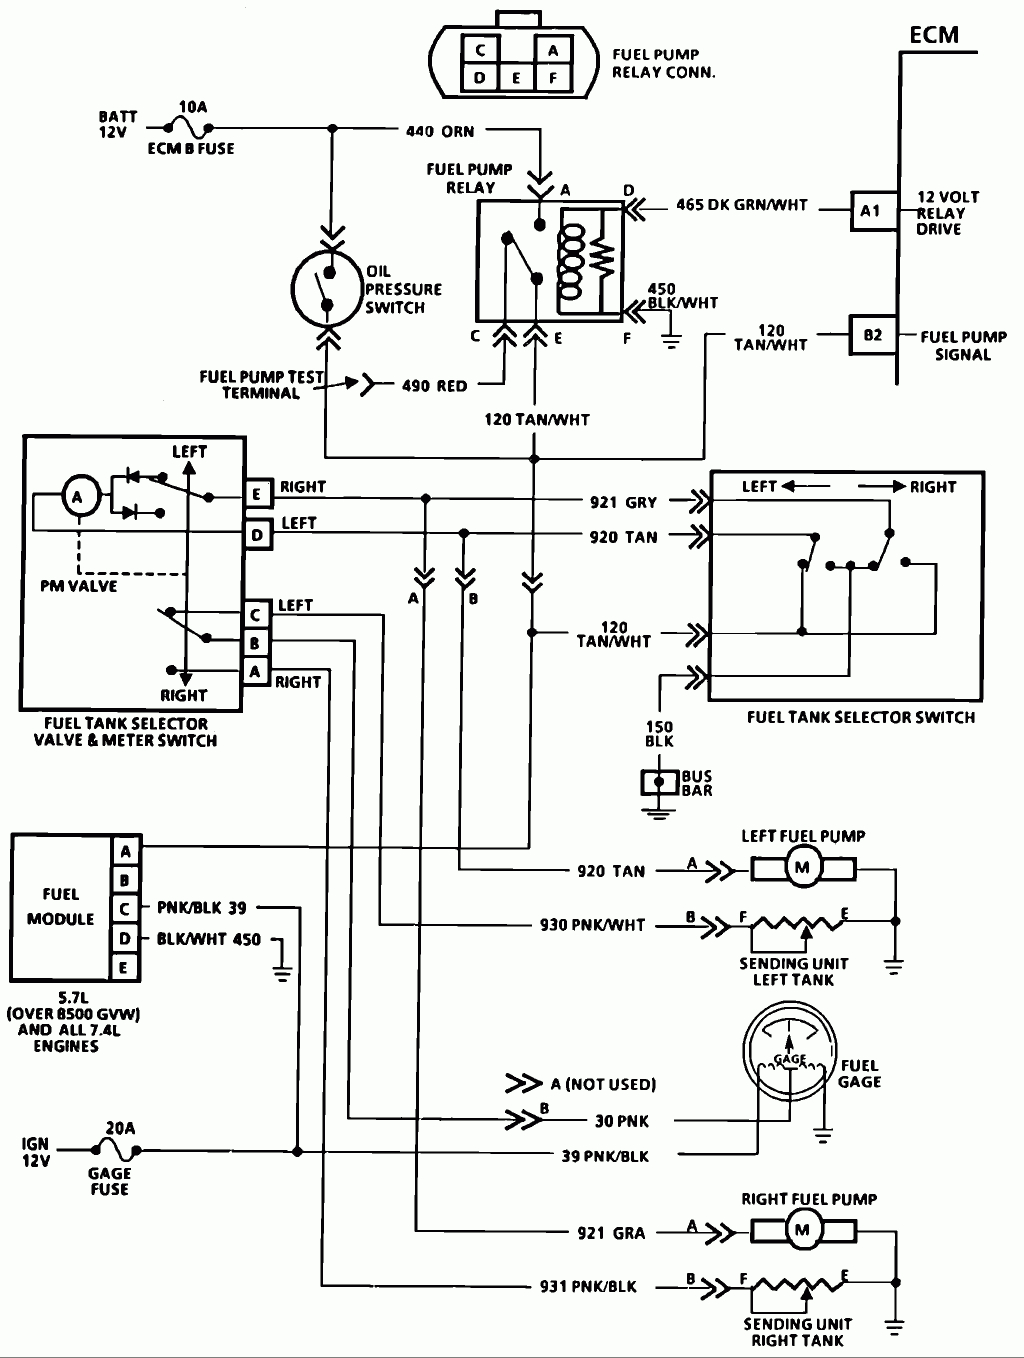 I Have A 1987 Chevy Truck And I Cannot Find The Fuel Pump Relay - 1993 Chevy 1500 Fuel Pump Wiring Diagram